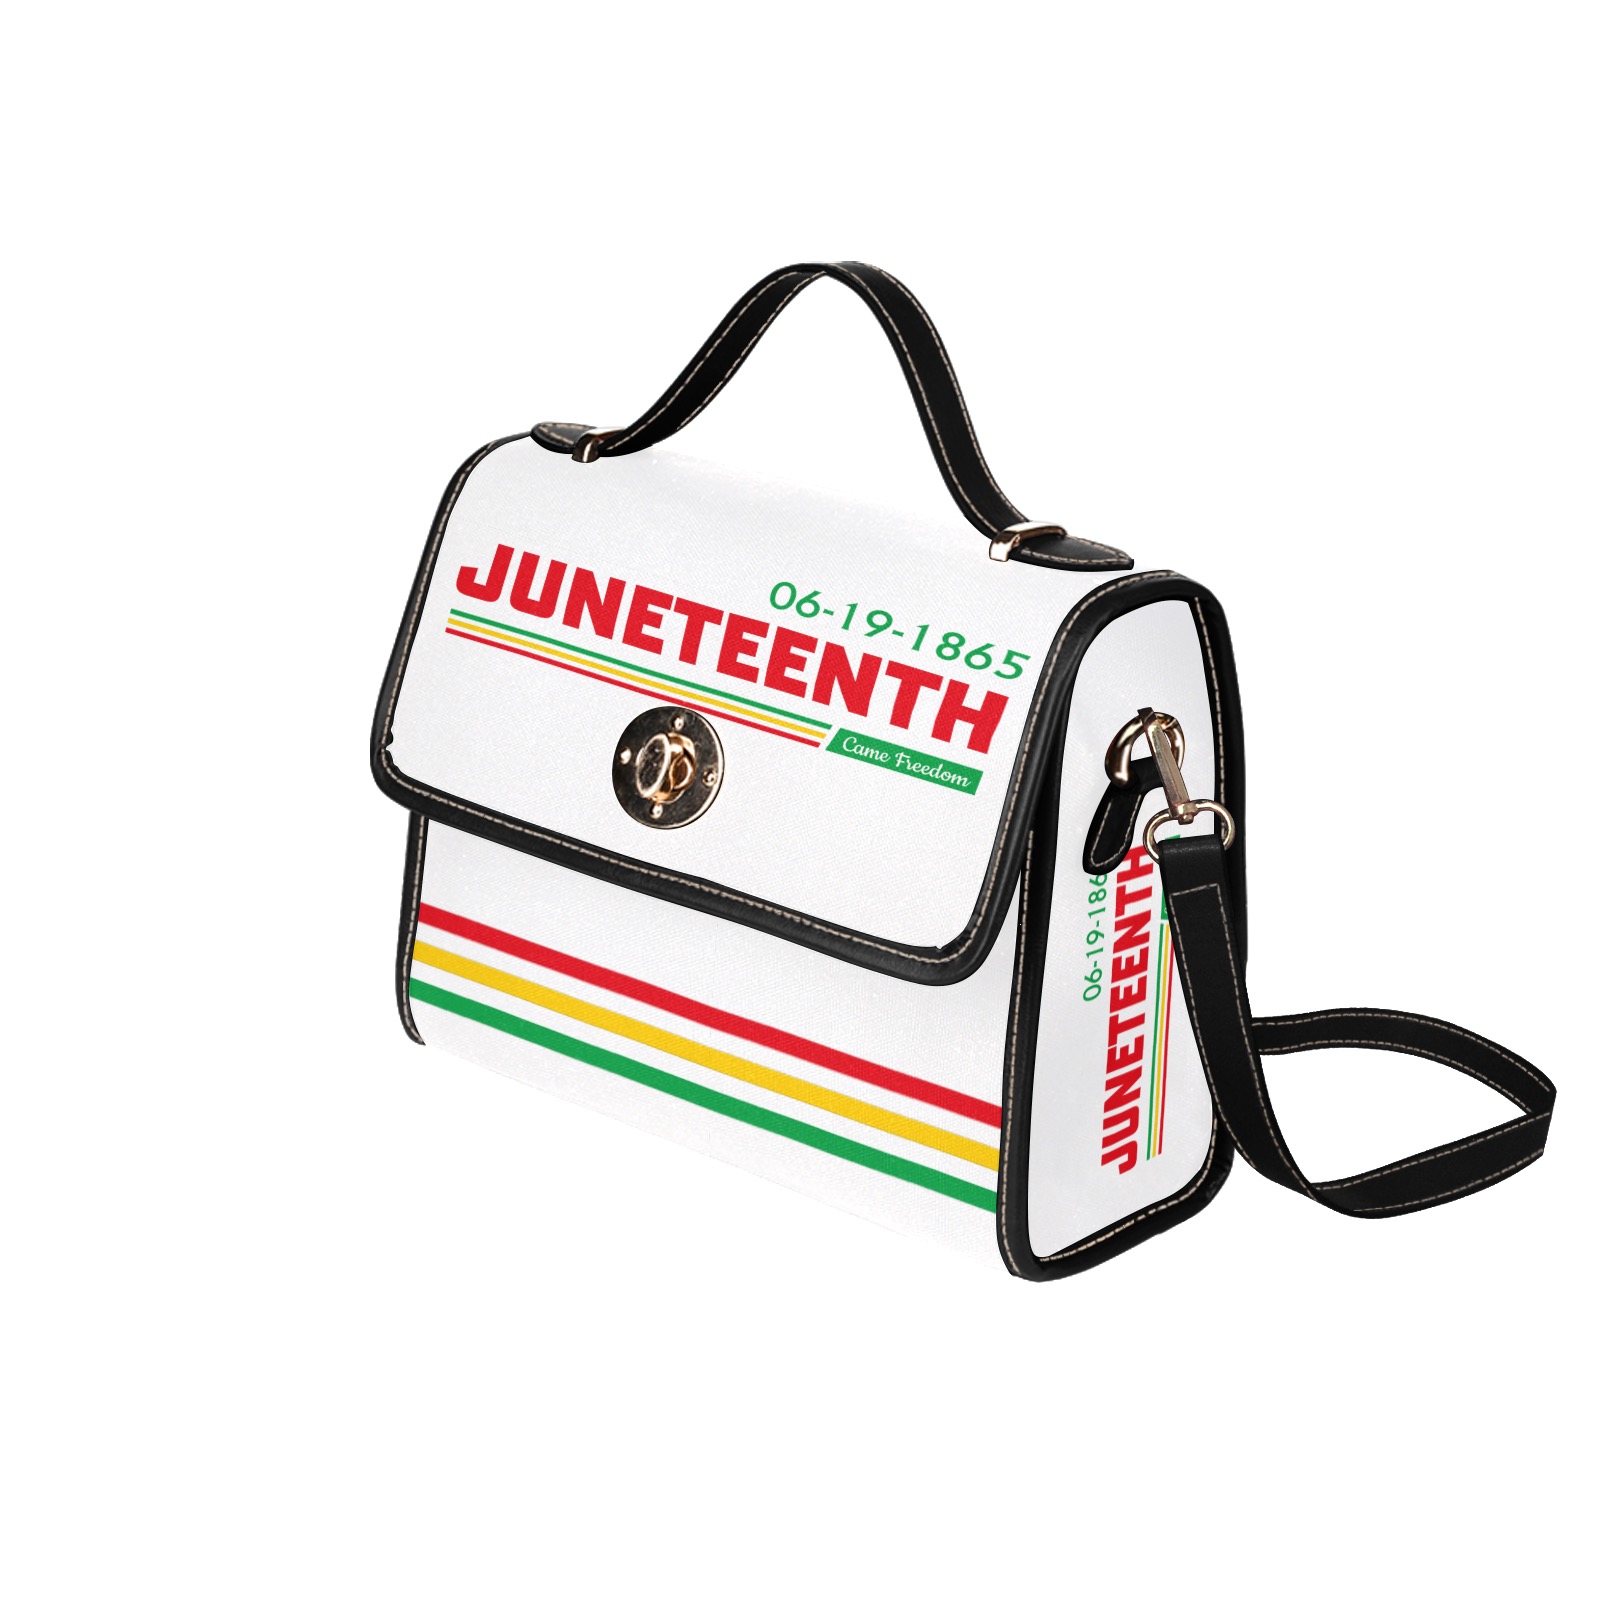 Juneteenth White Purse Waterproof Canvas Bag-Black (All Over Print) (Model 1641)